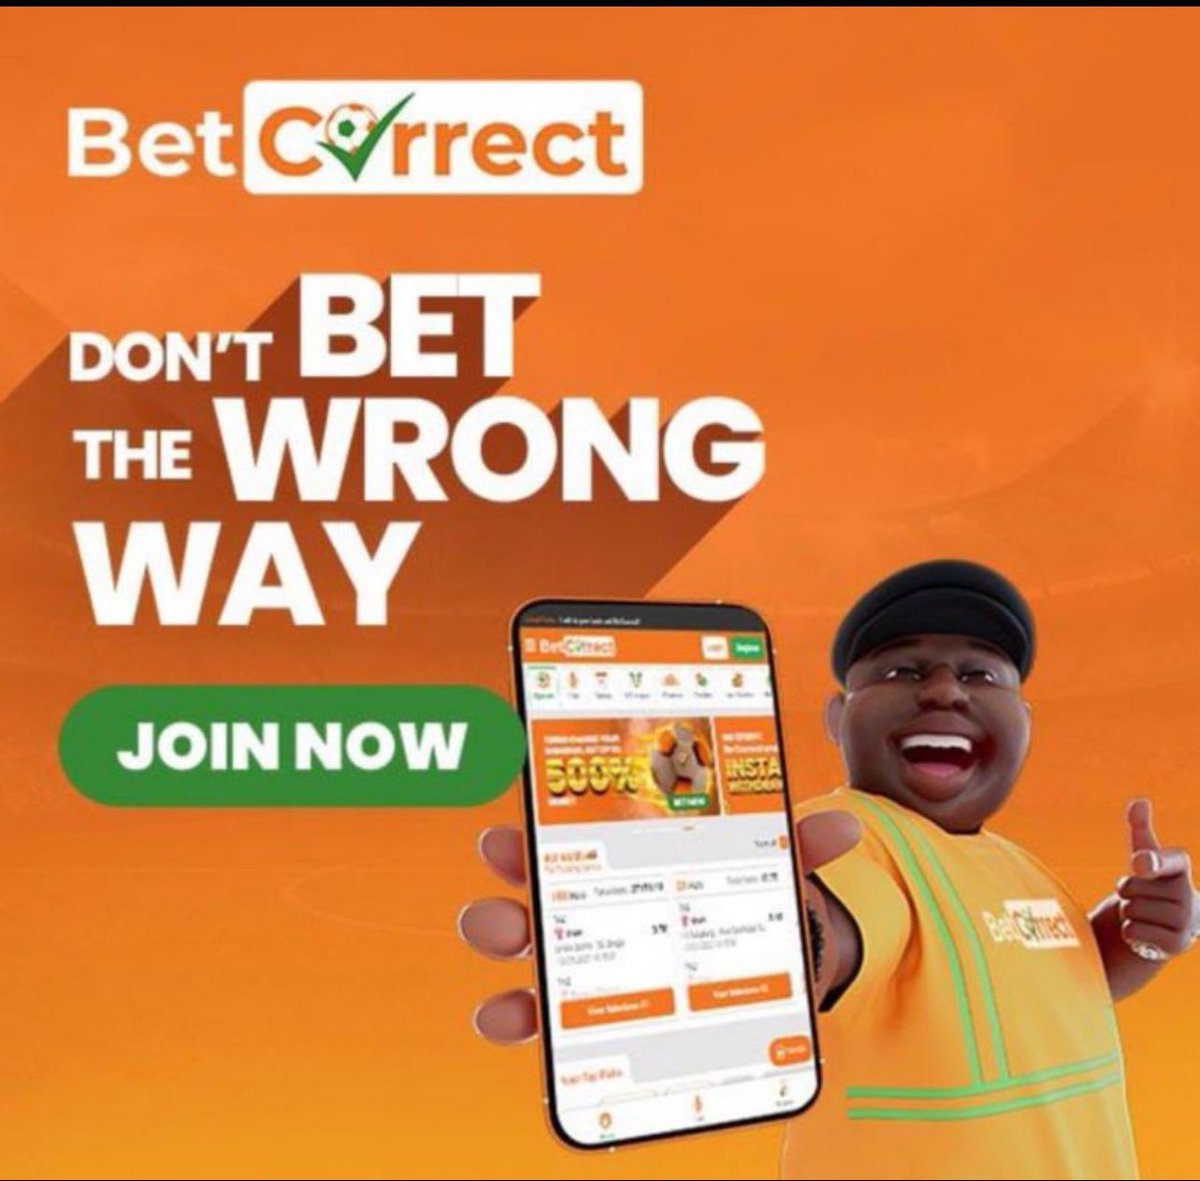 10 odd on @BetcorrectNG 

Code: BCA38X13

You don’t have account on betcorrect?

Register Below👇👇👇

Sign up here 👉 bit.ly/Morayoor_WB